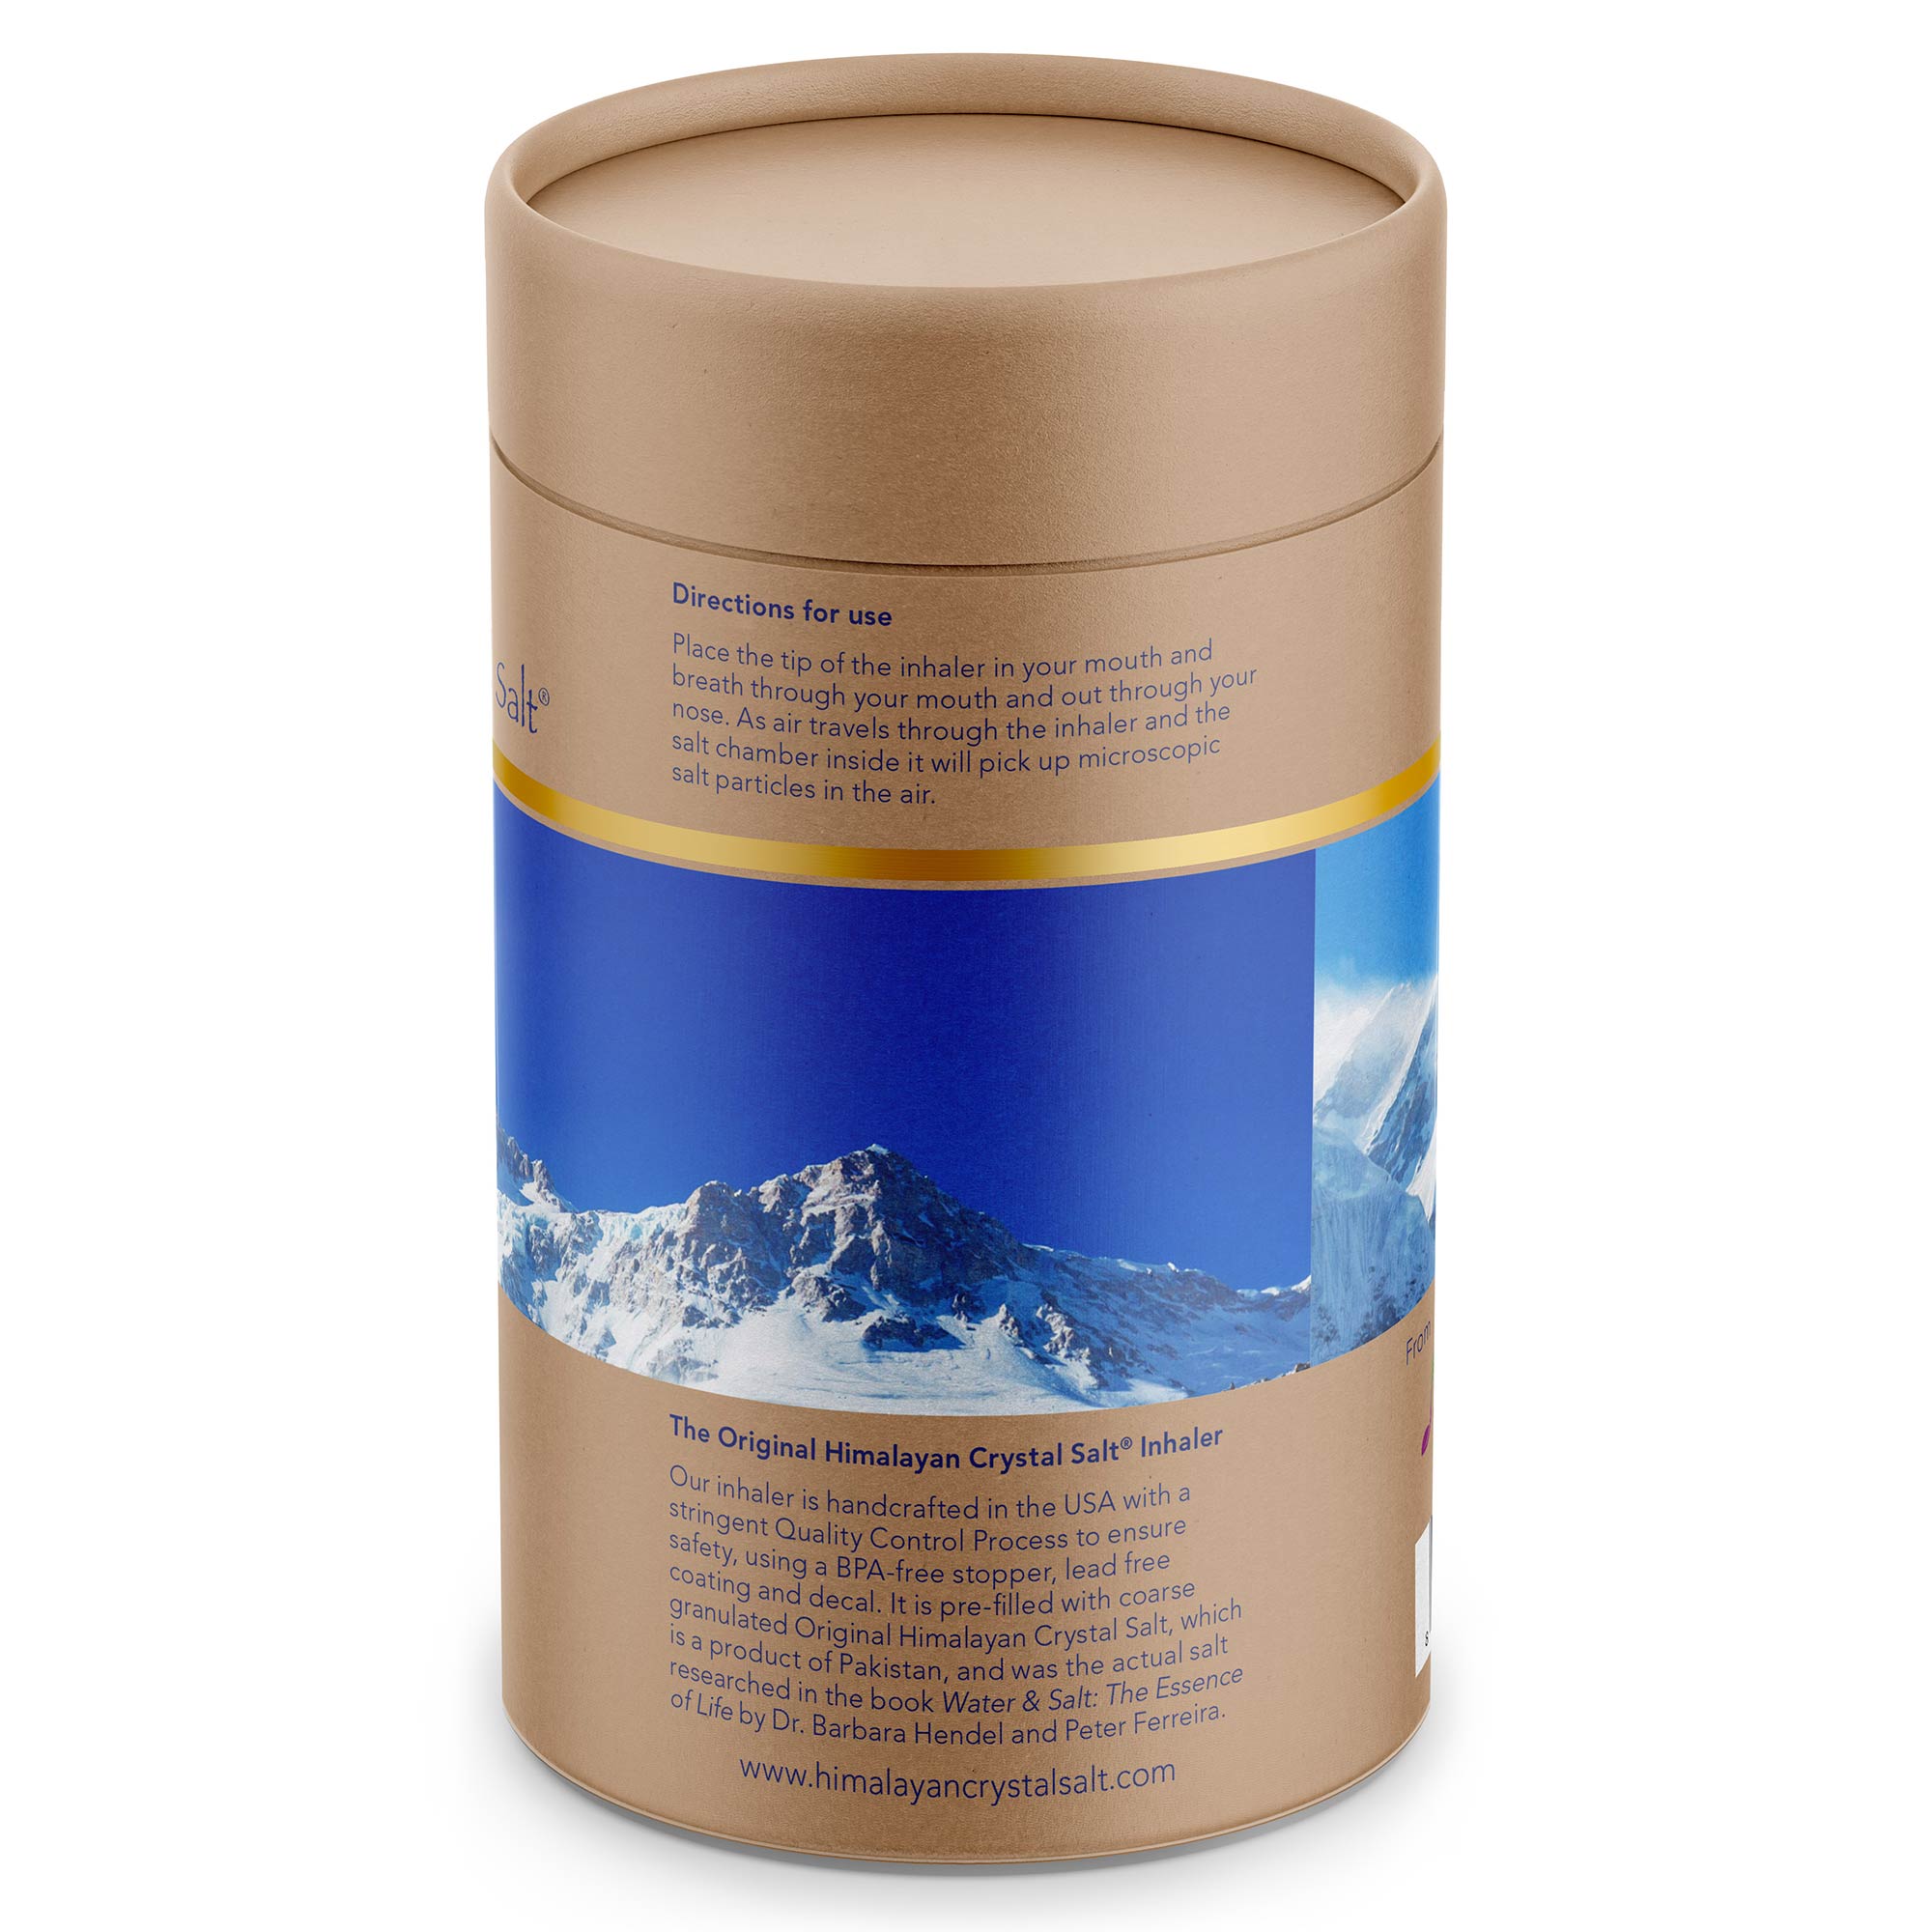 Original Himalayan Crystal Salt Inhaler back of product box, tan cylindrical shape with gold band and snow-capped mountains and blue sky, with white background